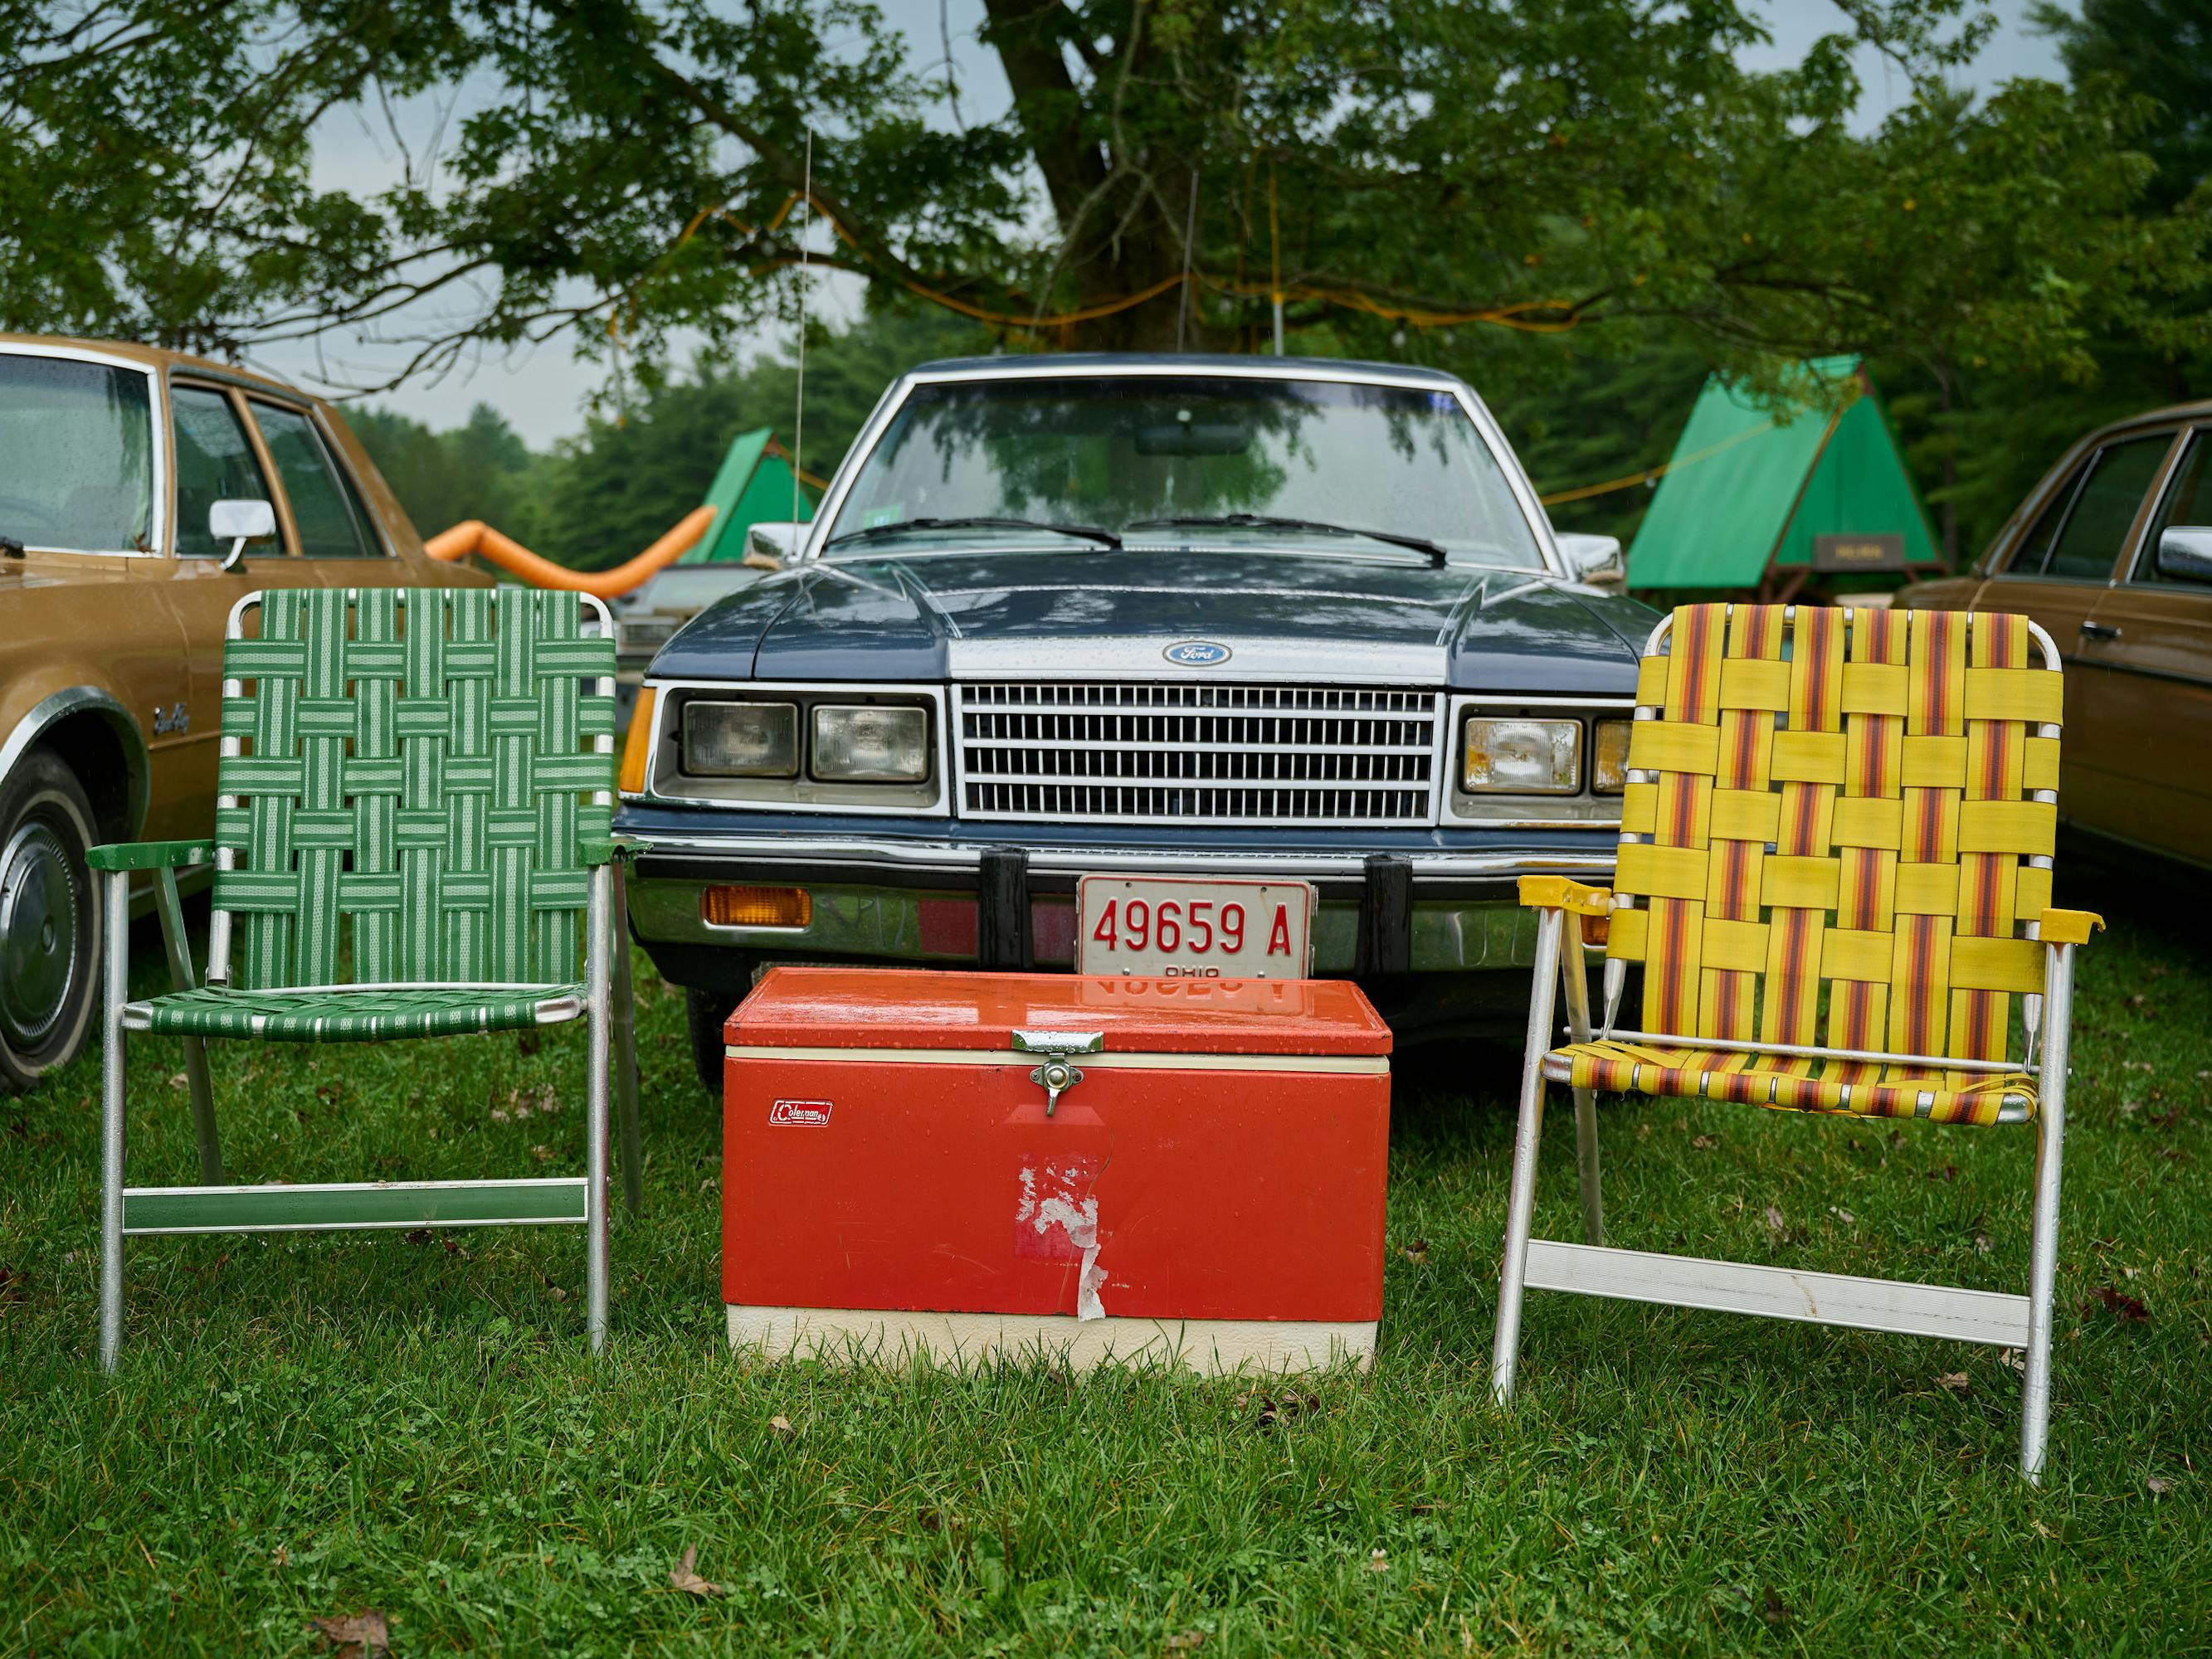 A cooler sits between a yellow  and a green lawn chair on a grassy parking lot. A station wagon is behind them.